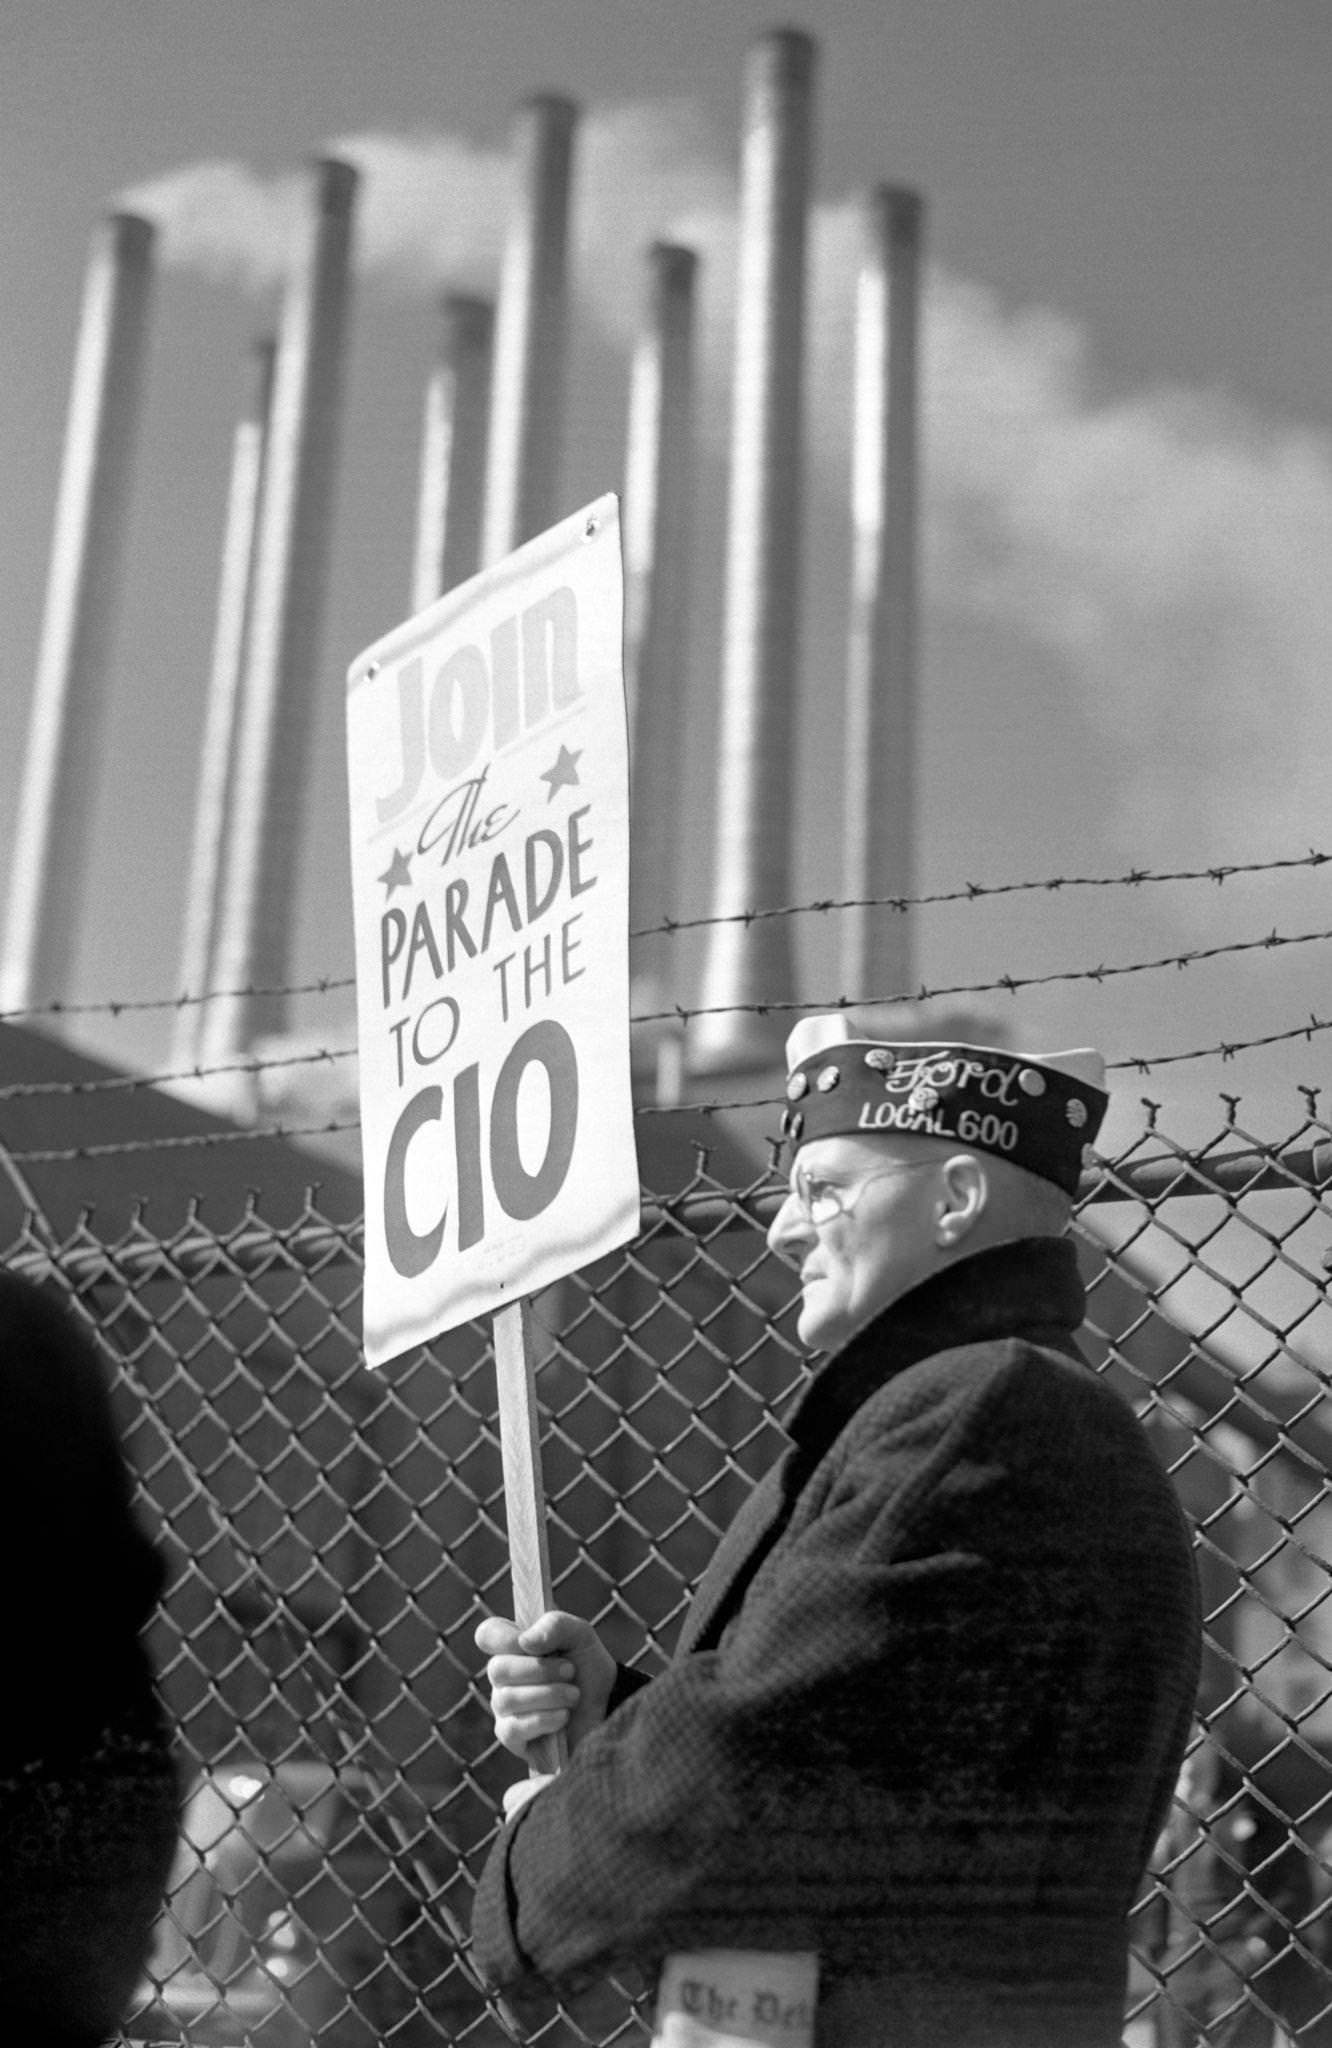 A man walks the picket line during the Ford Motor Company Labor strike at the Ford River Rouge complex in Dearborn, Michigan, April 11, 1941.